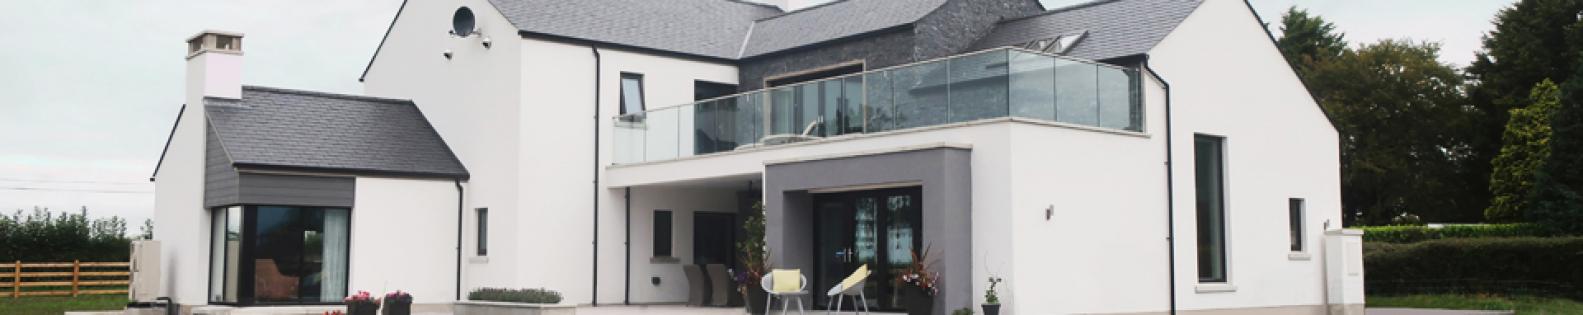 Ultra Low Energy Home in Randalstown, Northern Ireland